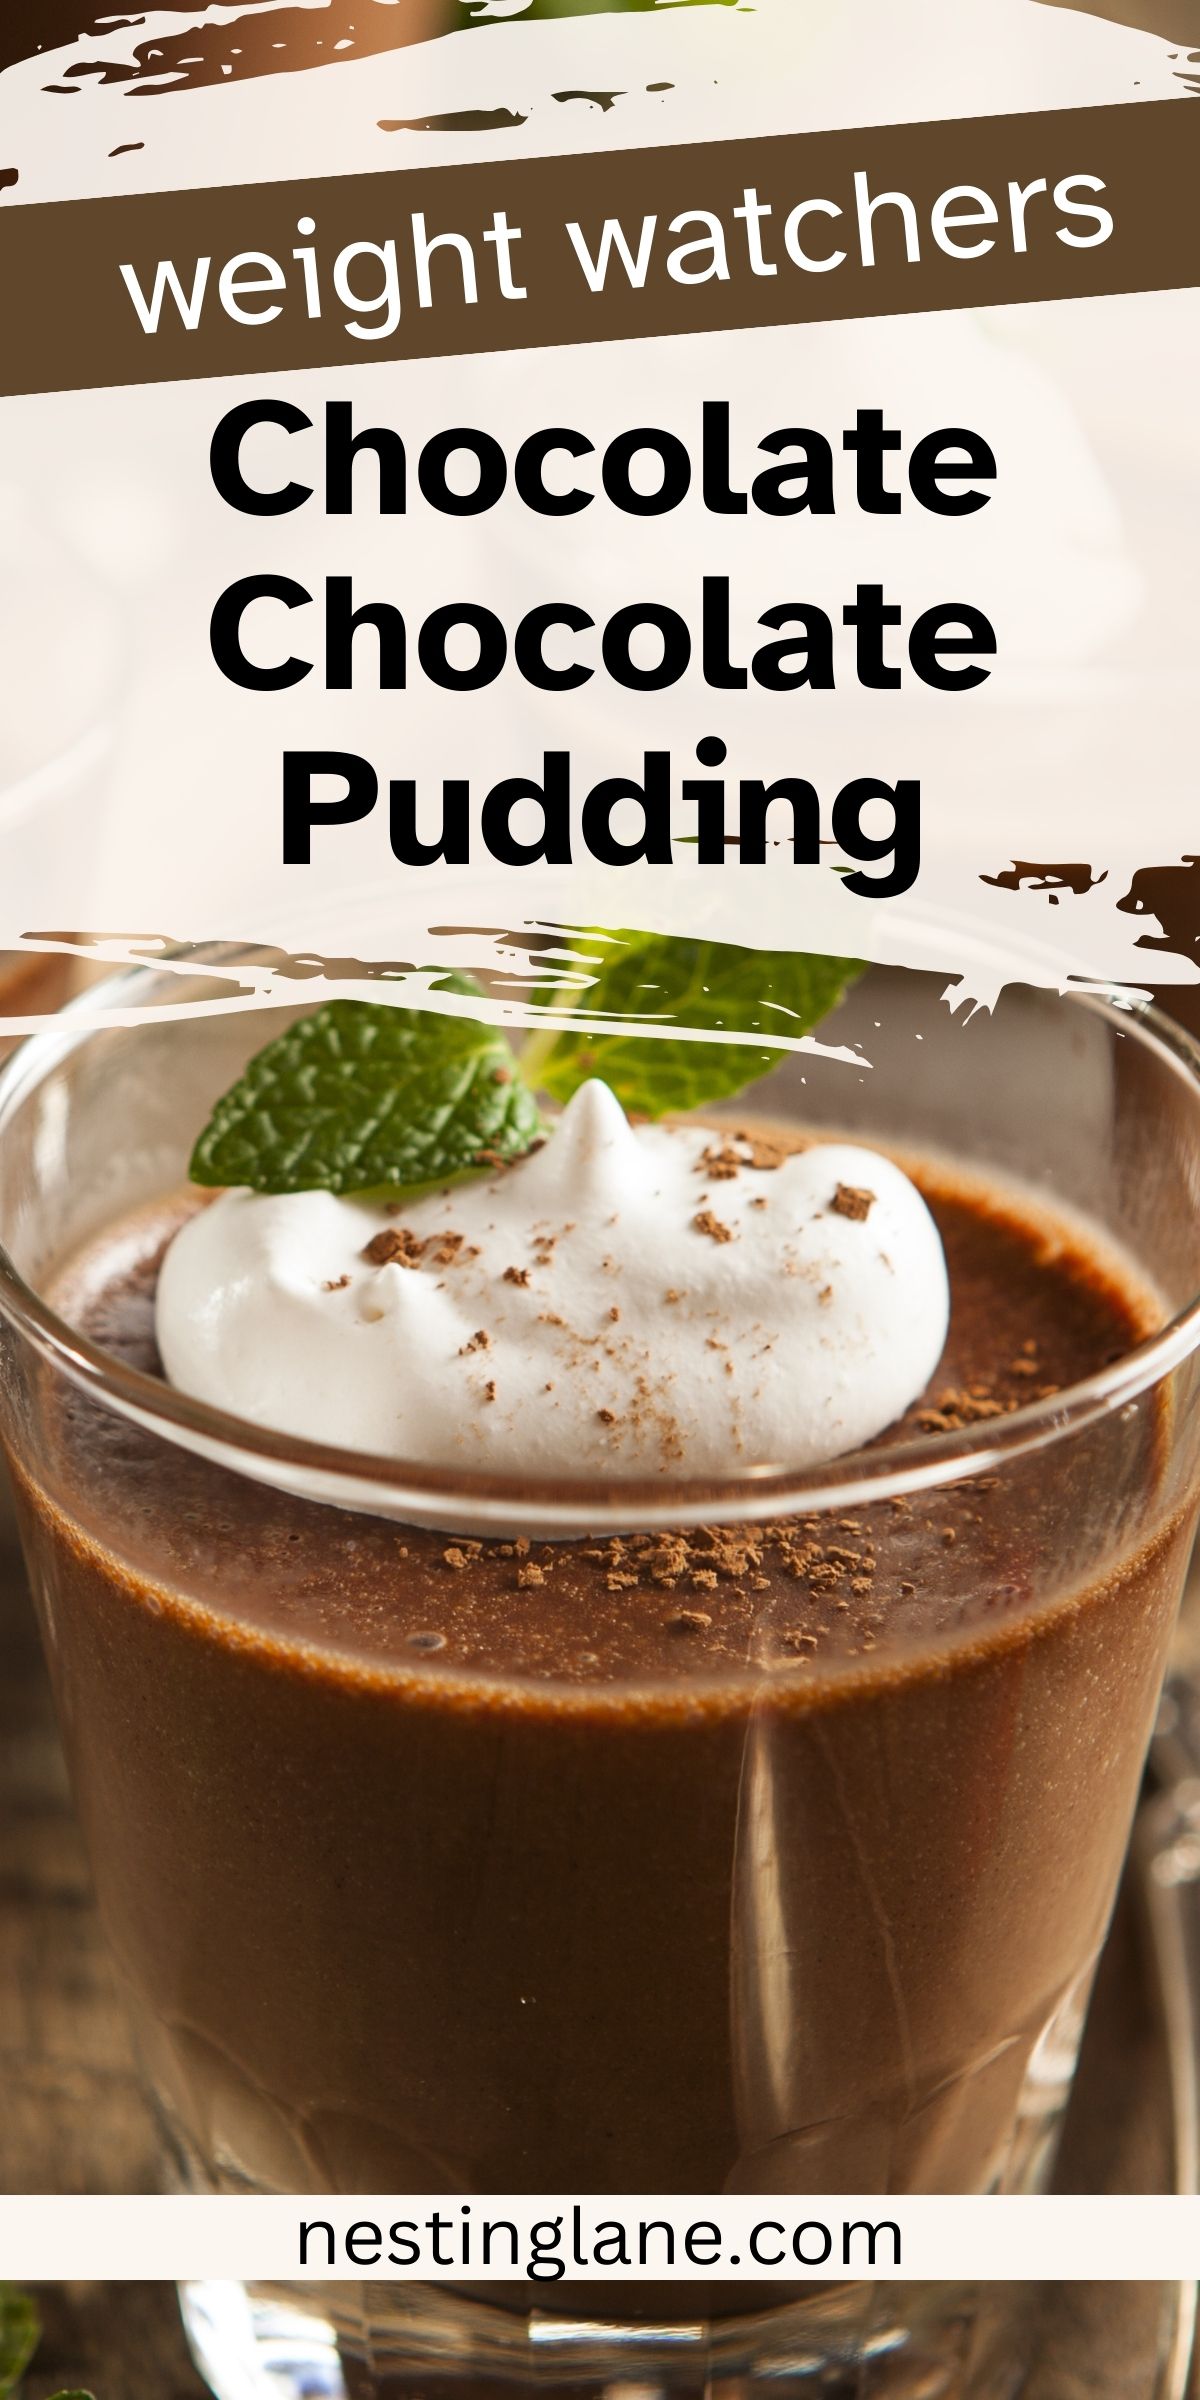 Graphic for Pinterest of Weight Watchers Chocolate Chocolate Pudding Recipe.